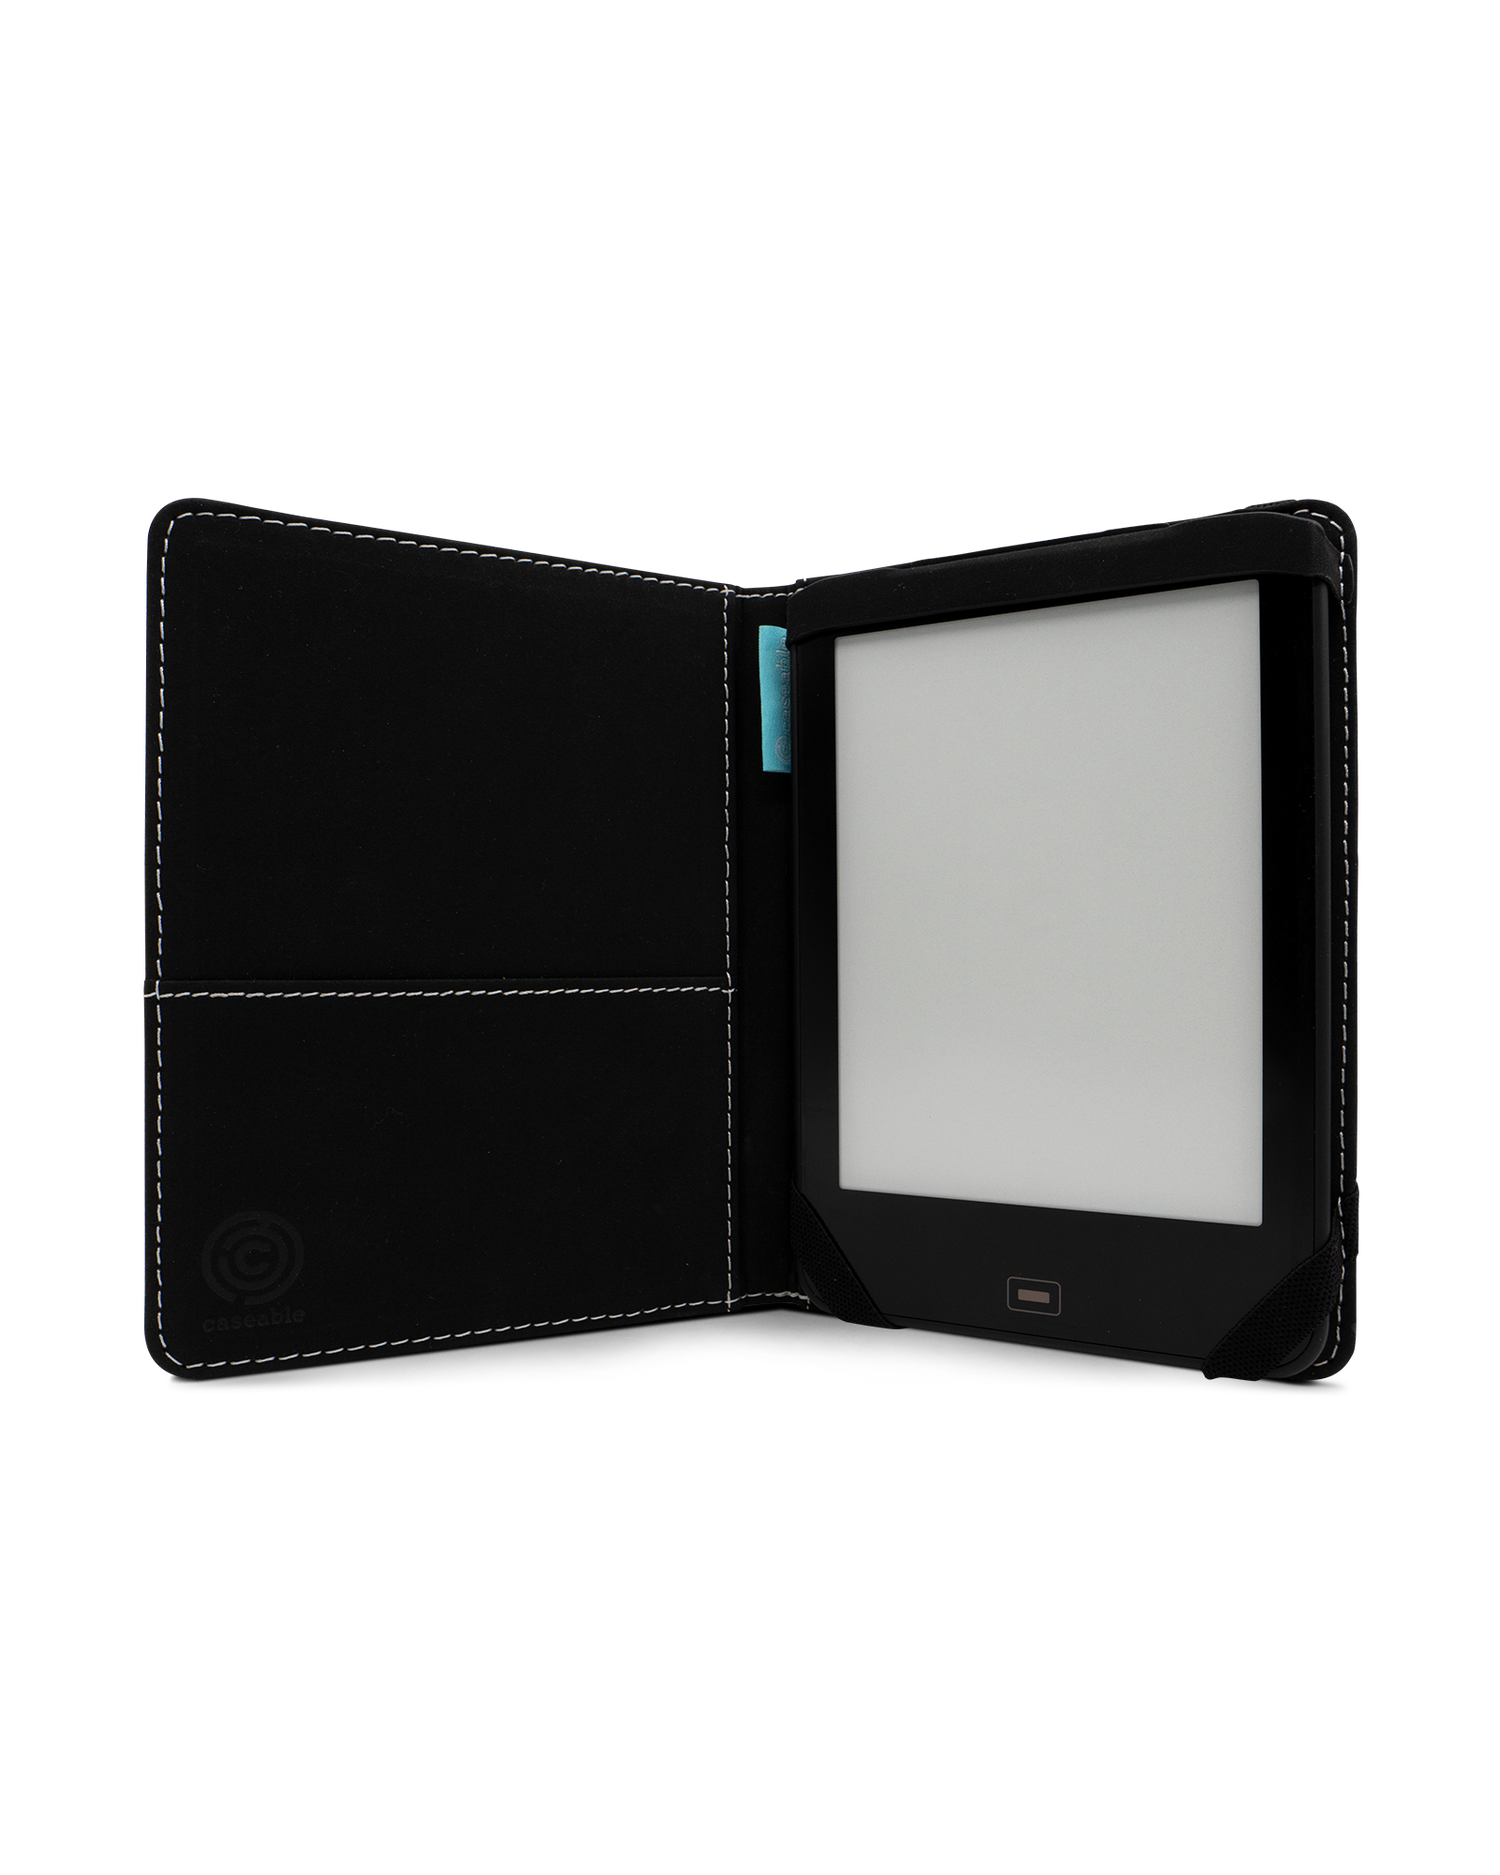 Ash eReader Case for tolino vision 1 to 4 HD: Opened interior view